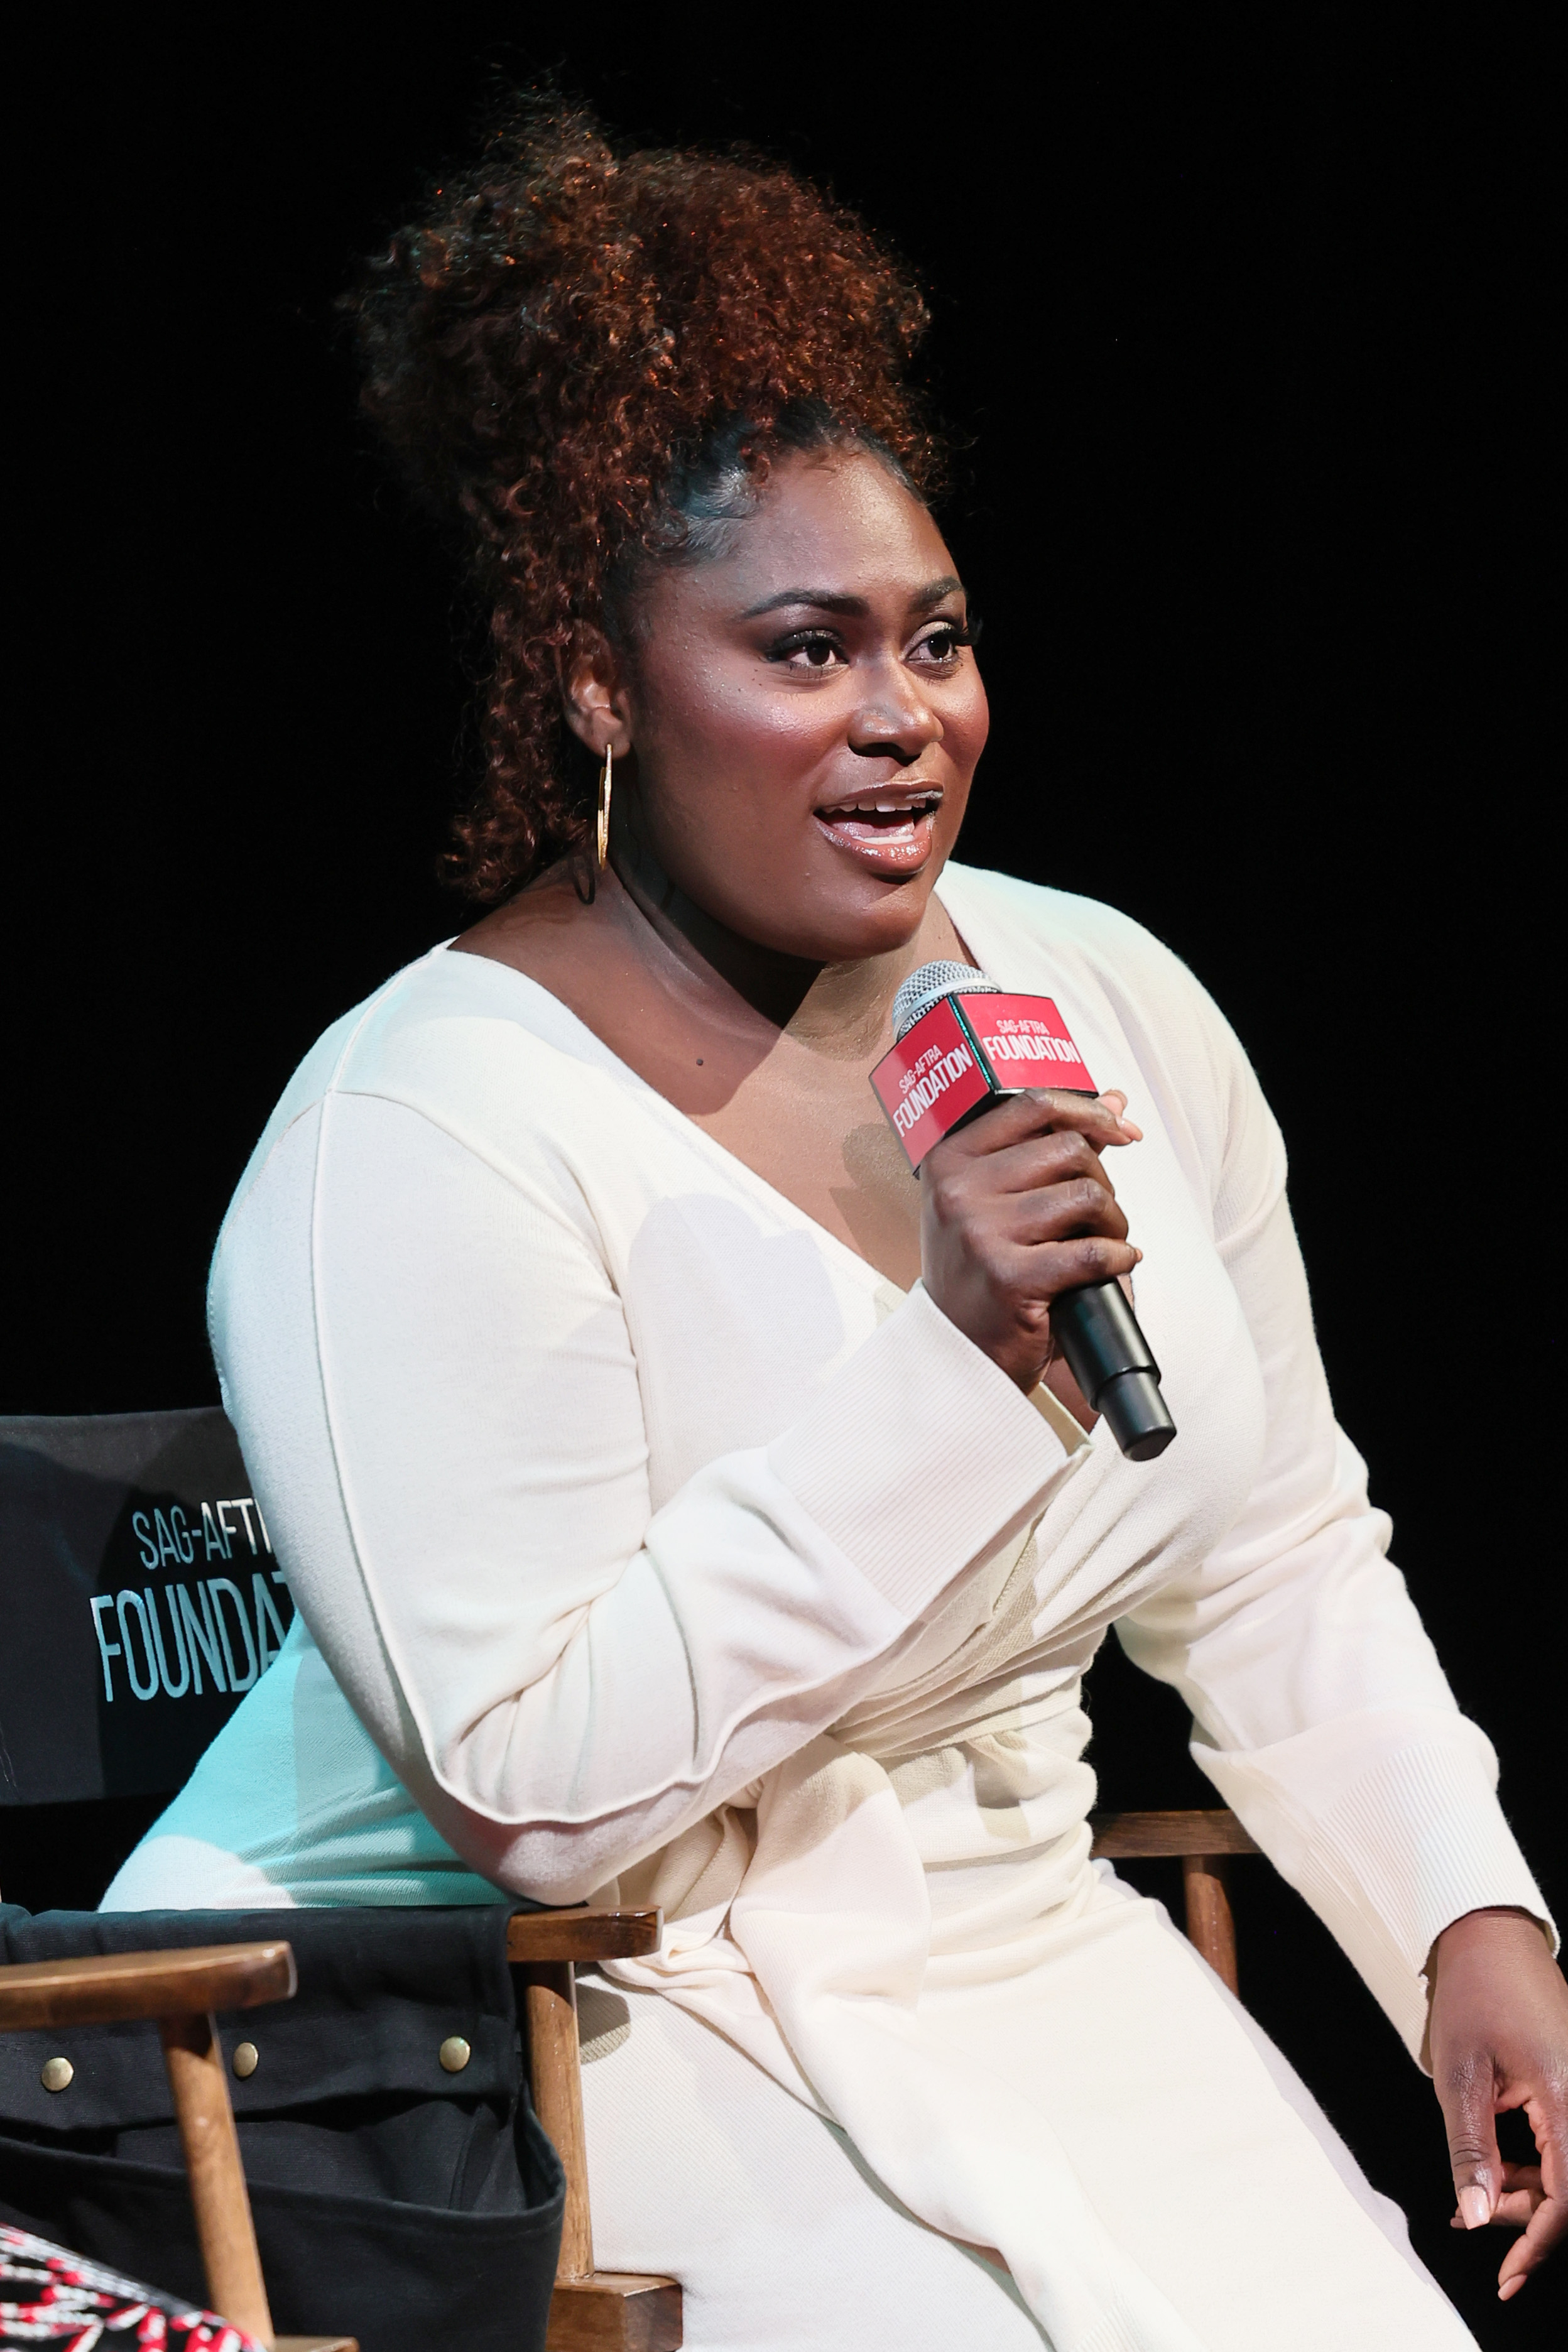 Close-up of Danielle seated onstage and holding a microphone